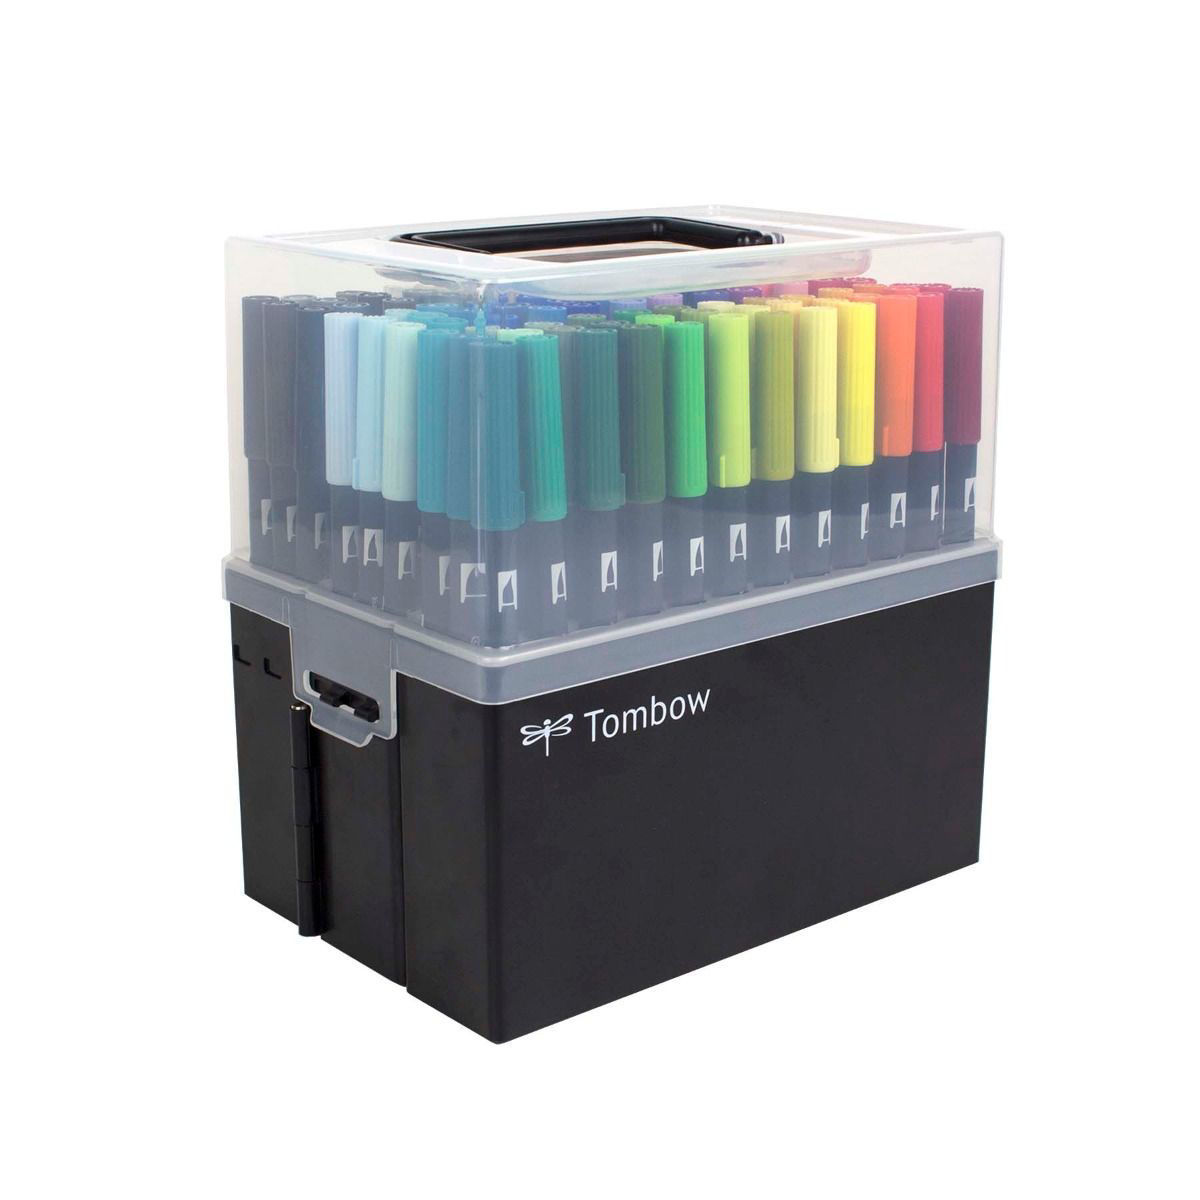 https://www.carpediemmarkers.com/images/thumbs/0034020_tombow-abt-dual-brush-pen-108-set-with-free-case.jpeg